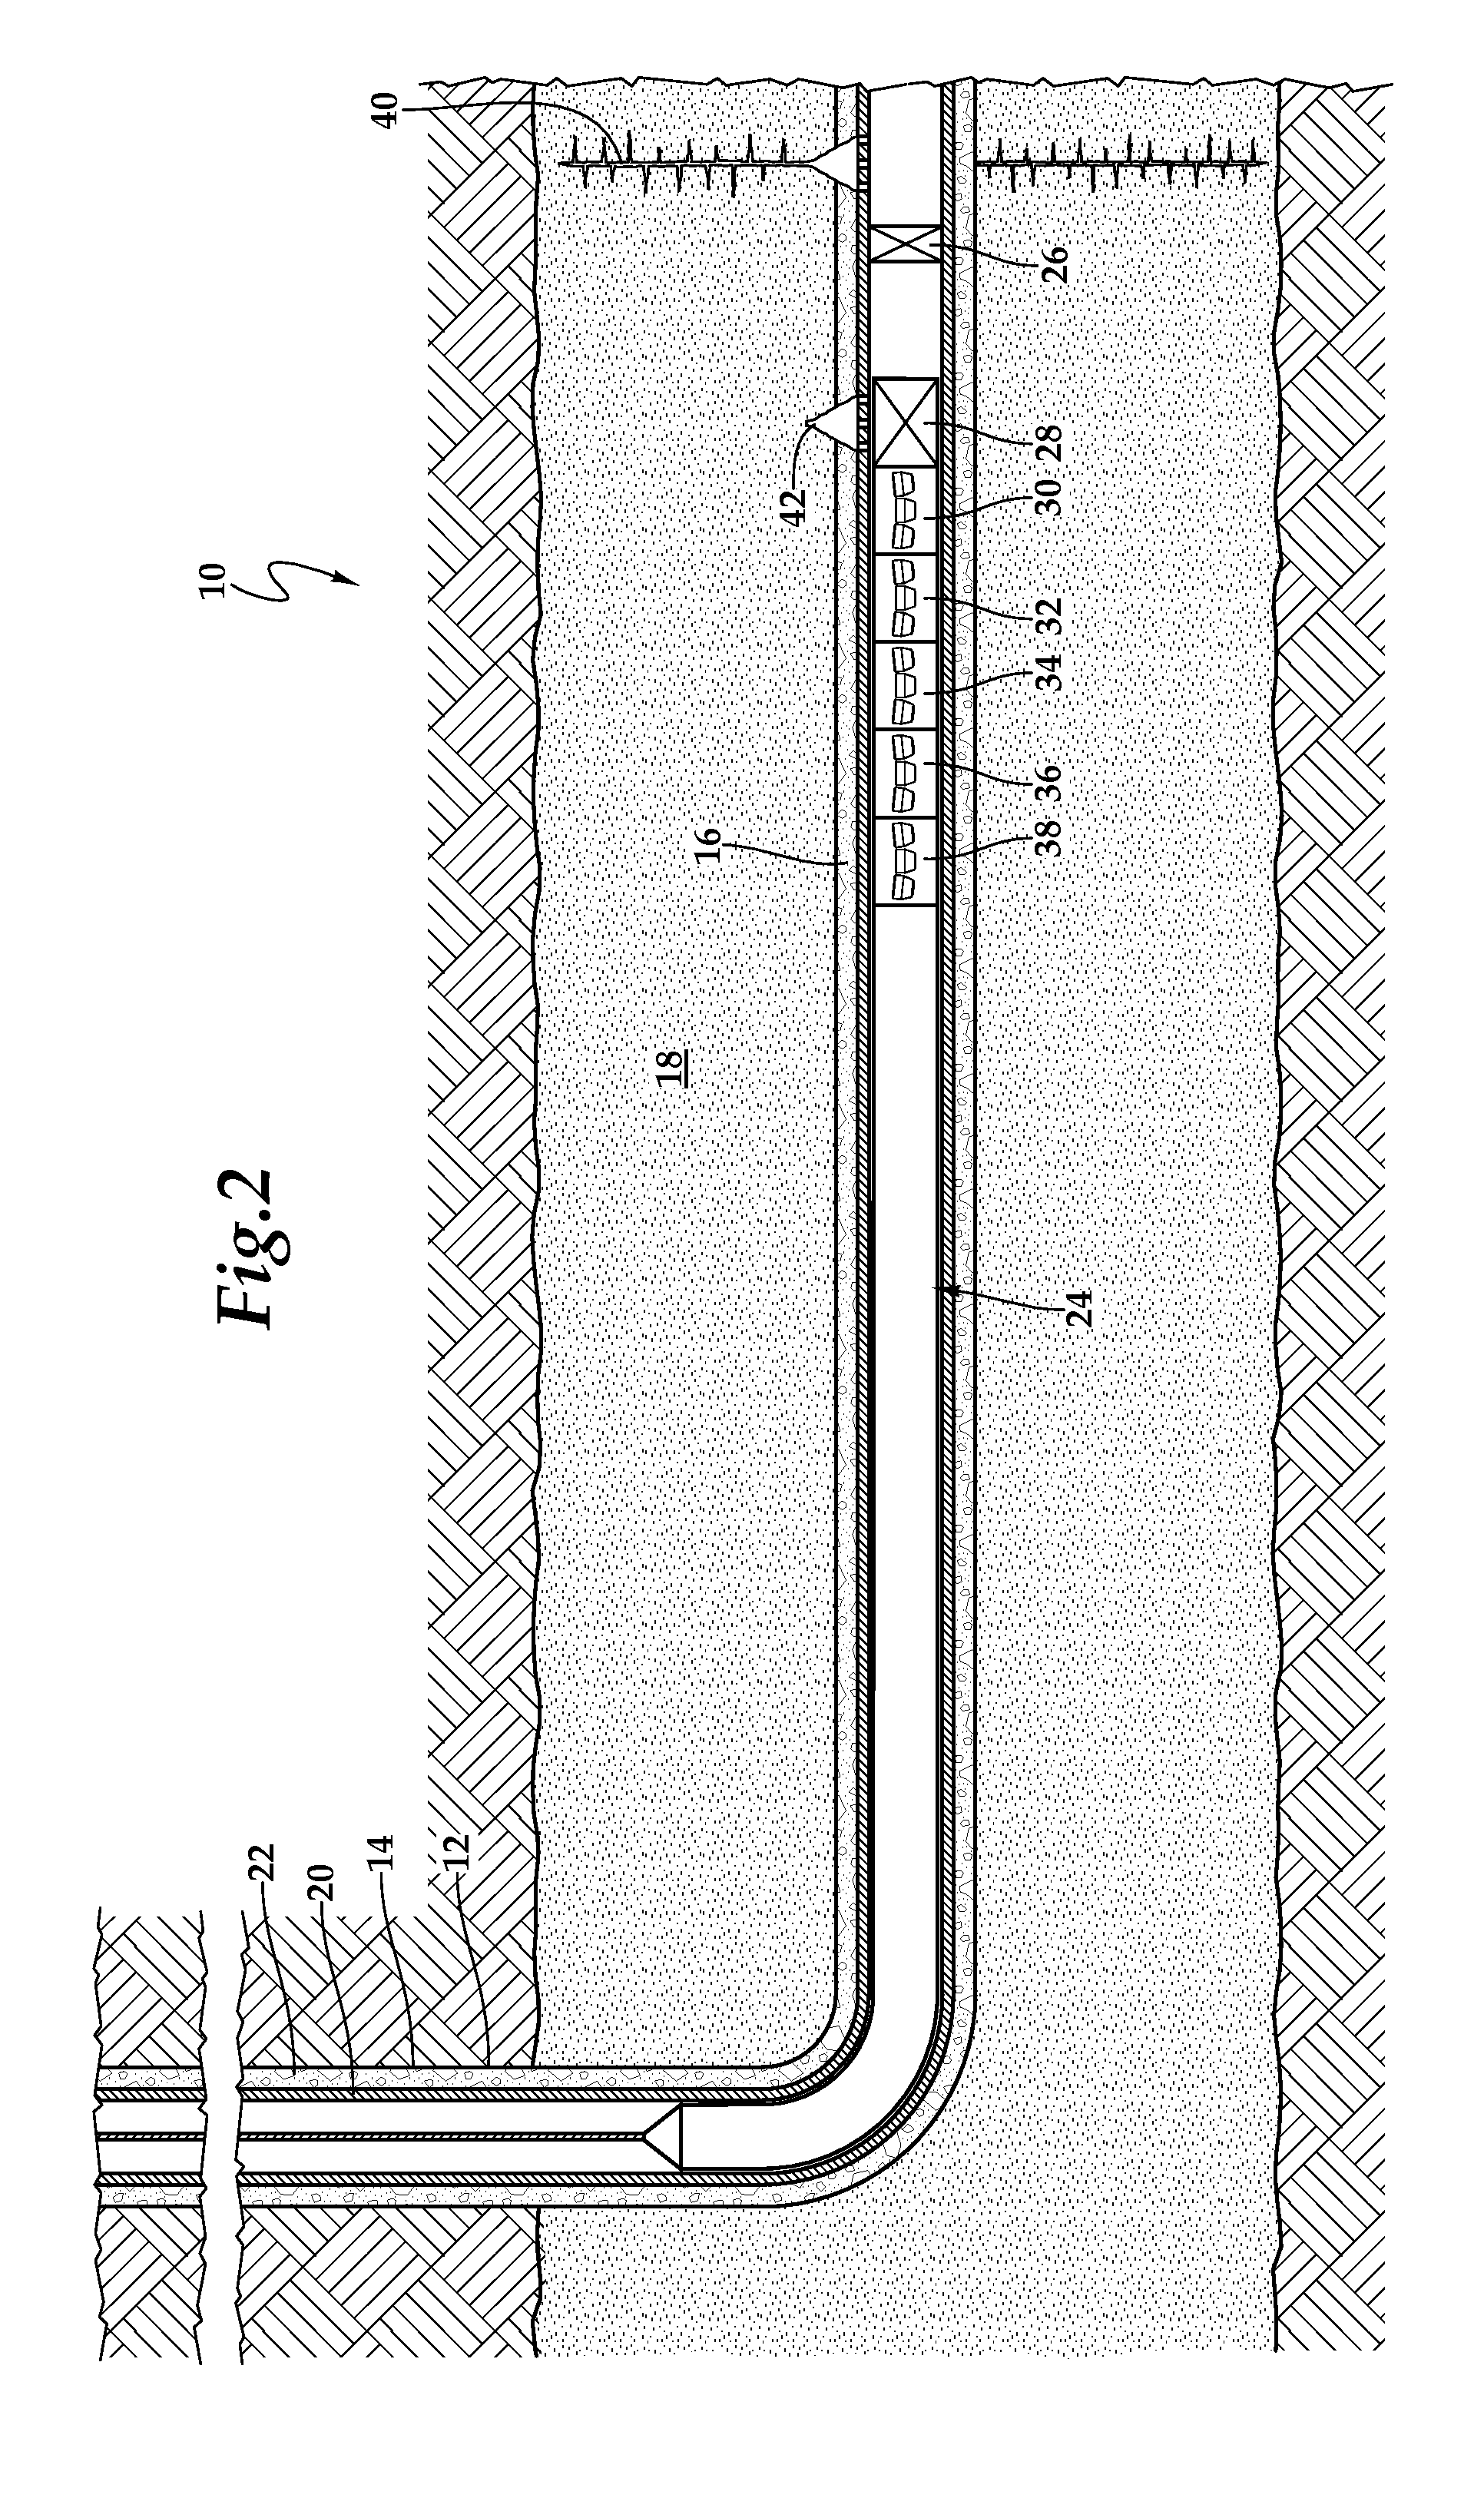 Method for generating discrete fracture initiation sites and propagating dominant planar fractures therefrom